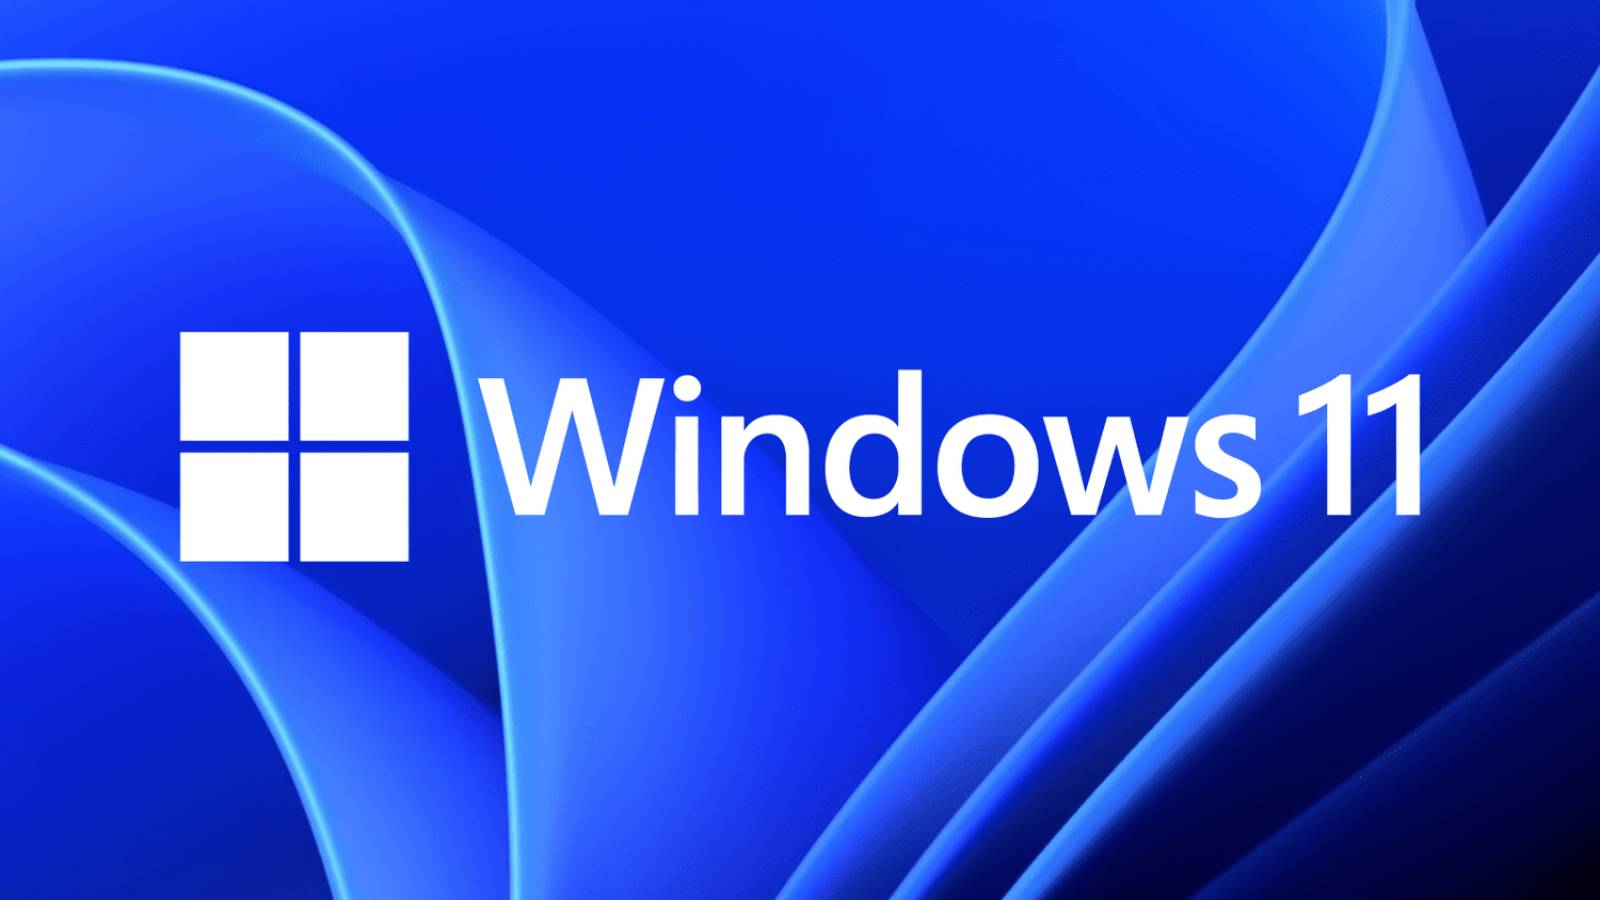 Microsoft Officially Announced Decision to REMOVE Windows 11 2024